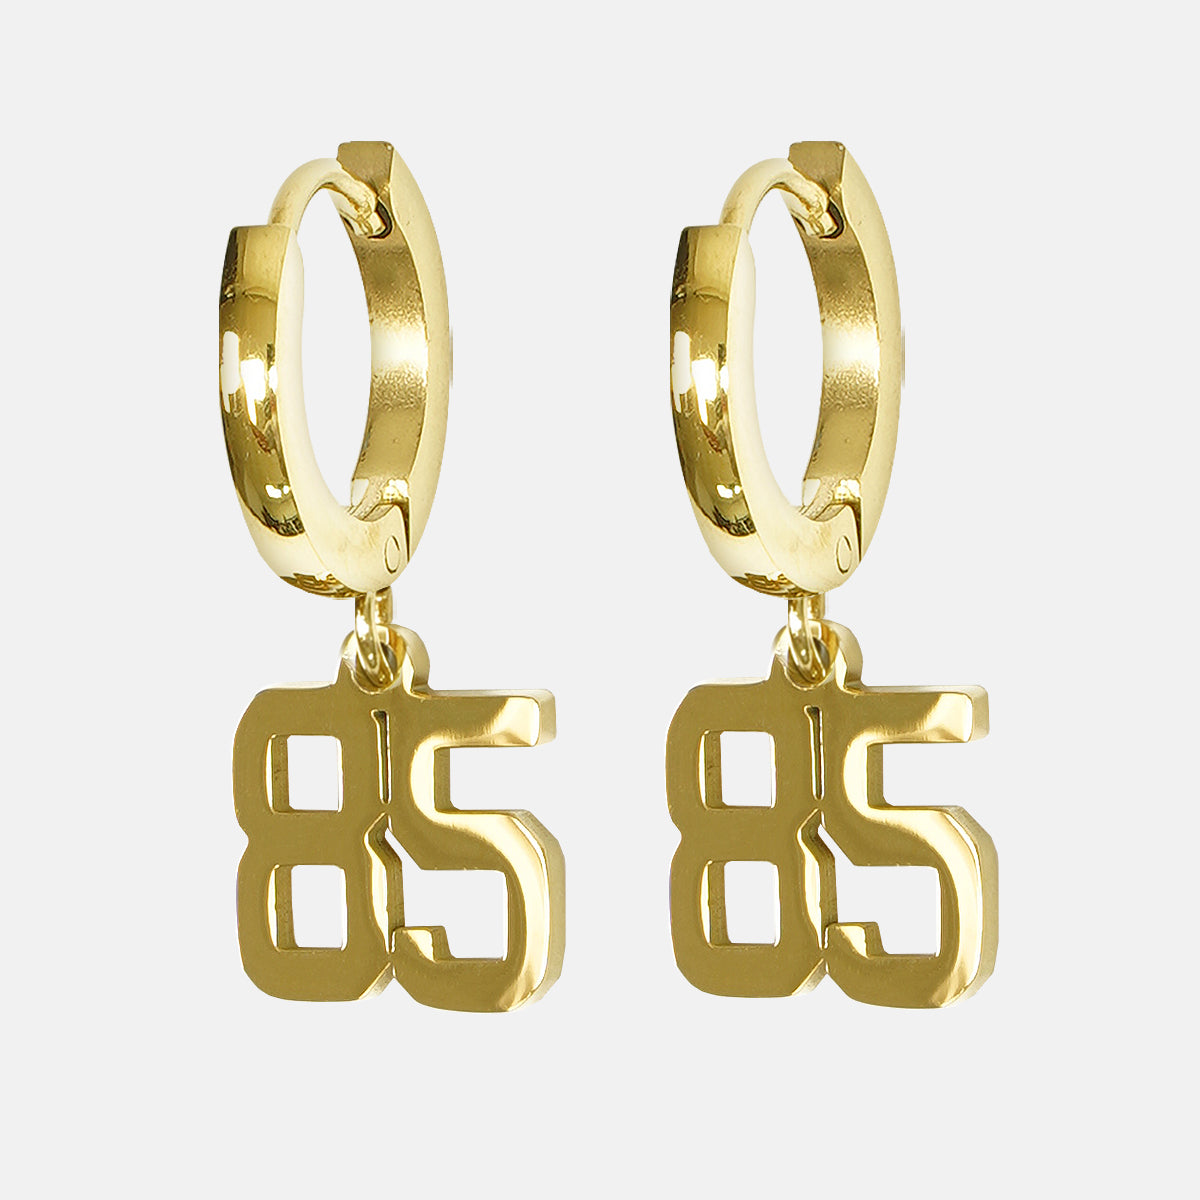 85 Number Earring - Gold Plated Stainless Steel